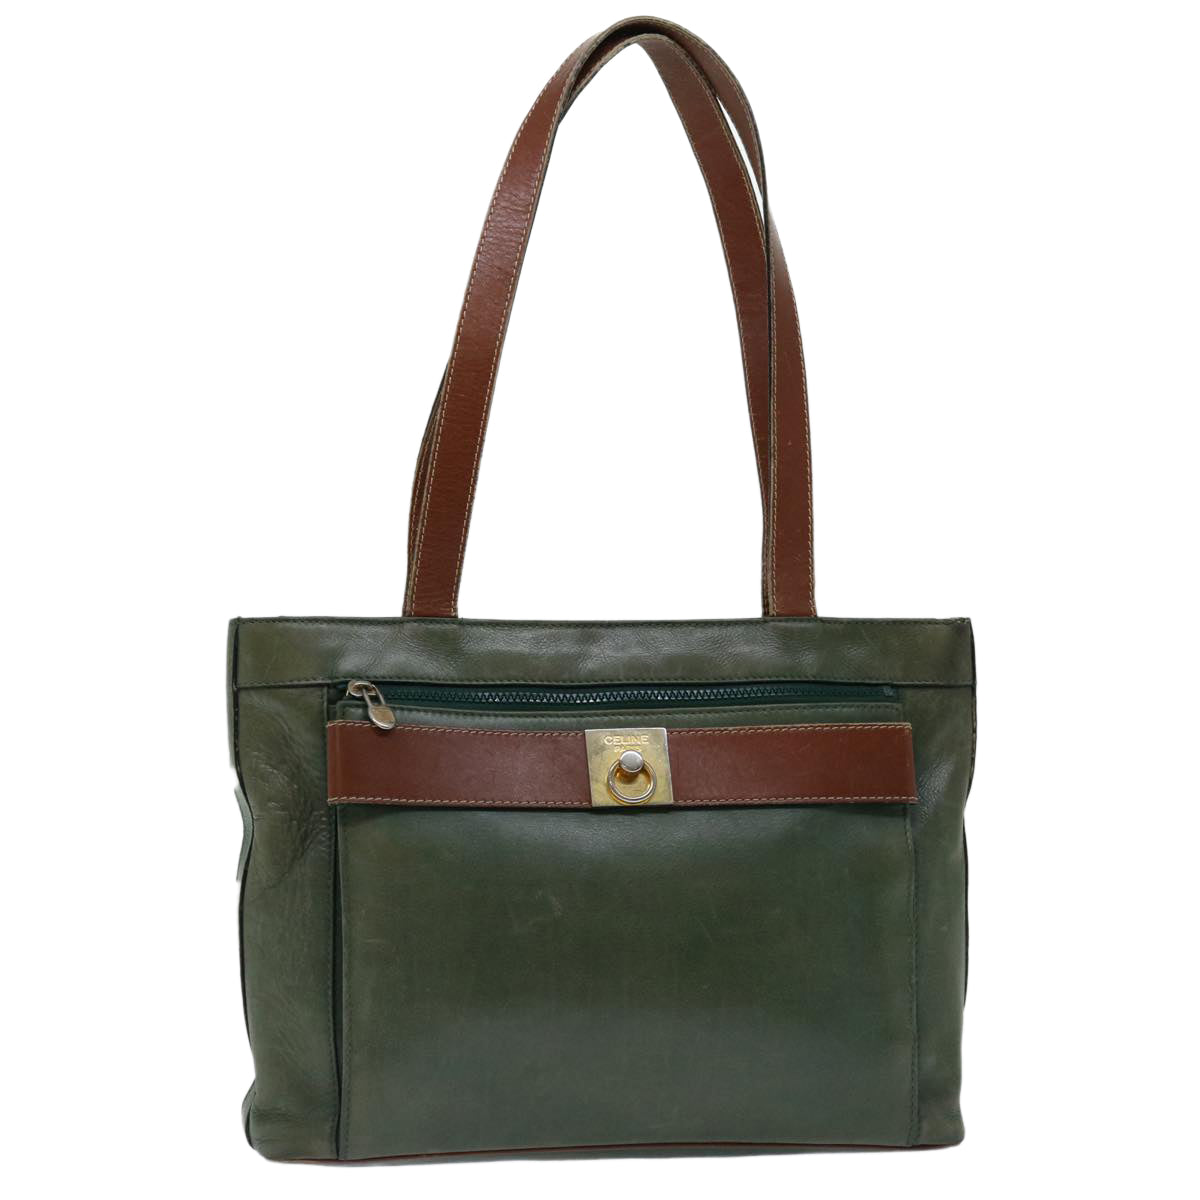 CELINE Tote Bag Leather Green Auth 68605